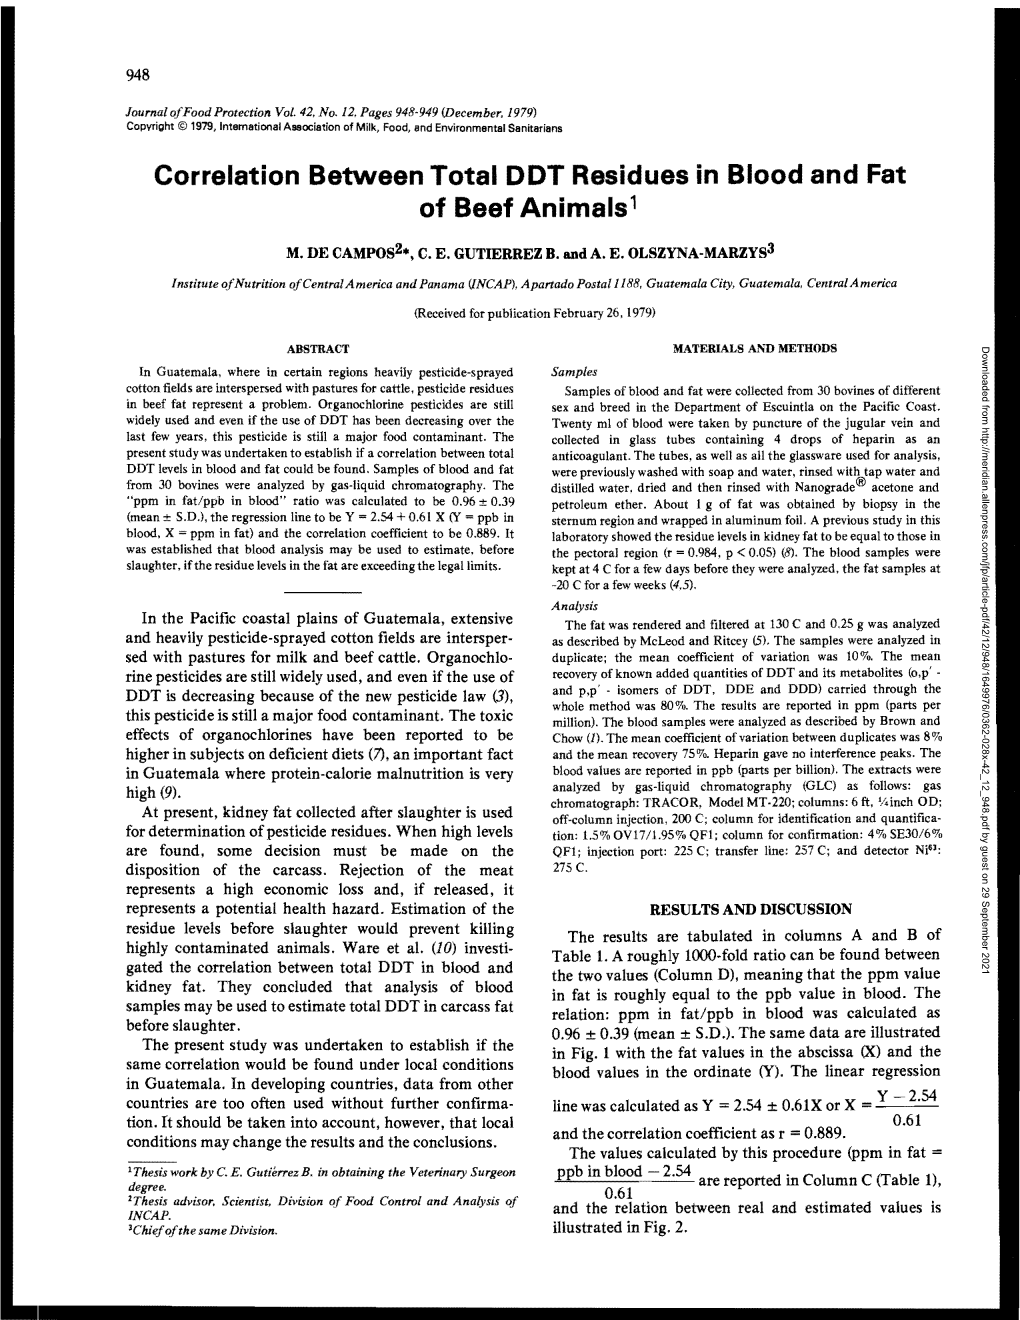 Correlation Between Total DDT Residues in Blood and Fat of Beef Animals 1